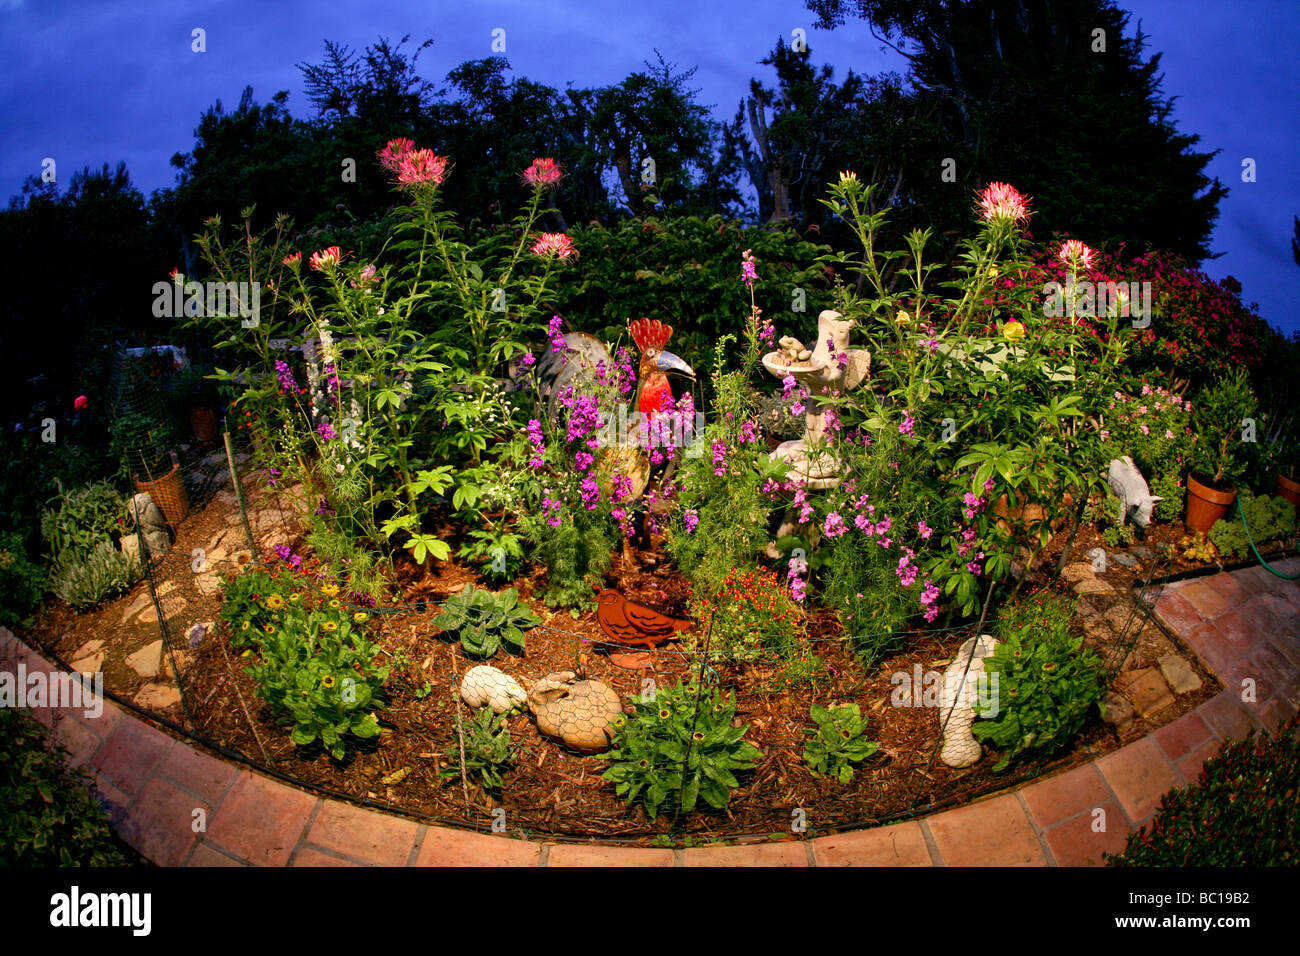 Amusing figures of a rooster, winged frog, and hippopotamus decorate a Southern California garden at twilight. Stock Photo